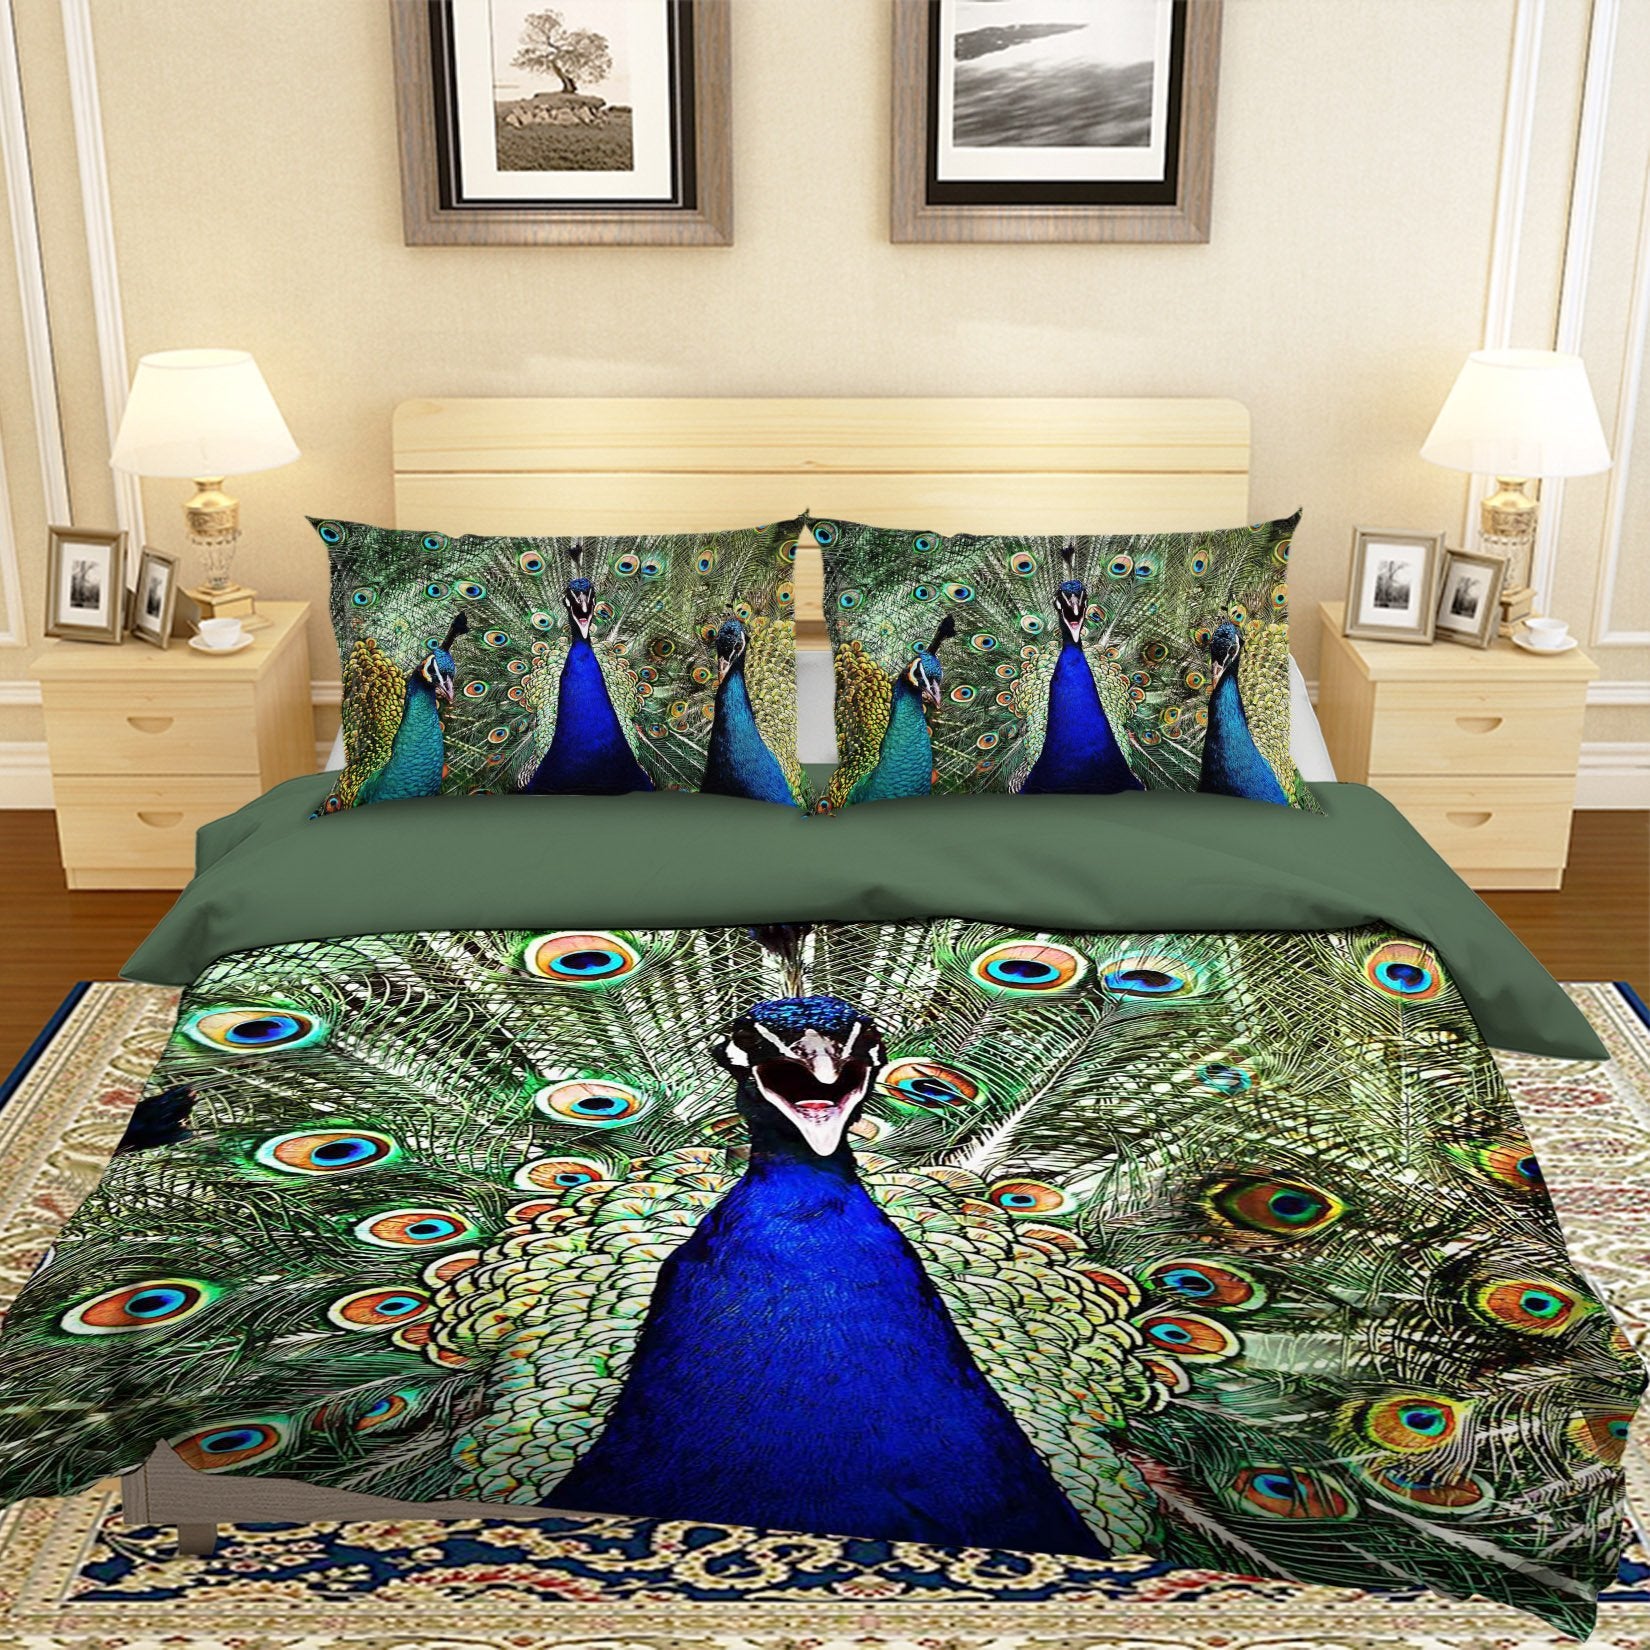 3D Peacock 1981 Bed Pillowcases Quilt Quiet Covers AJ Creativity Home 